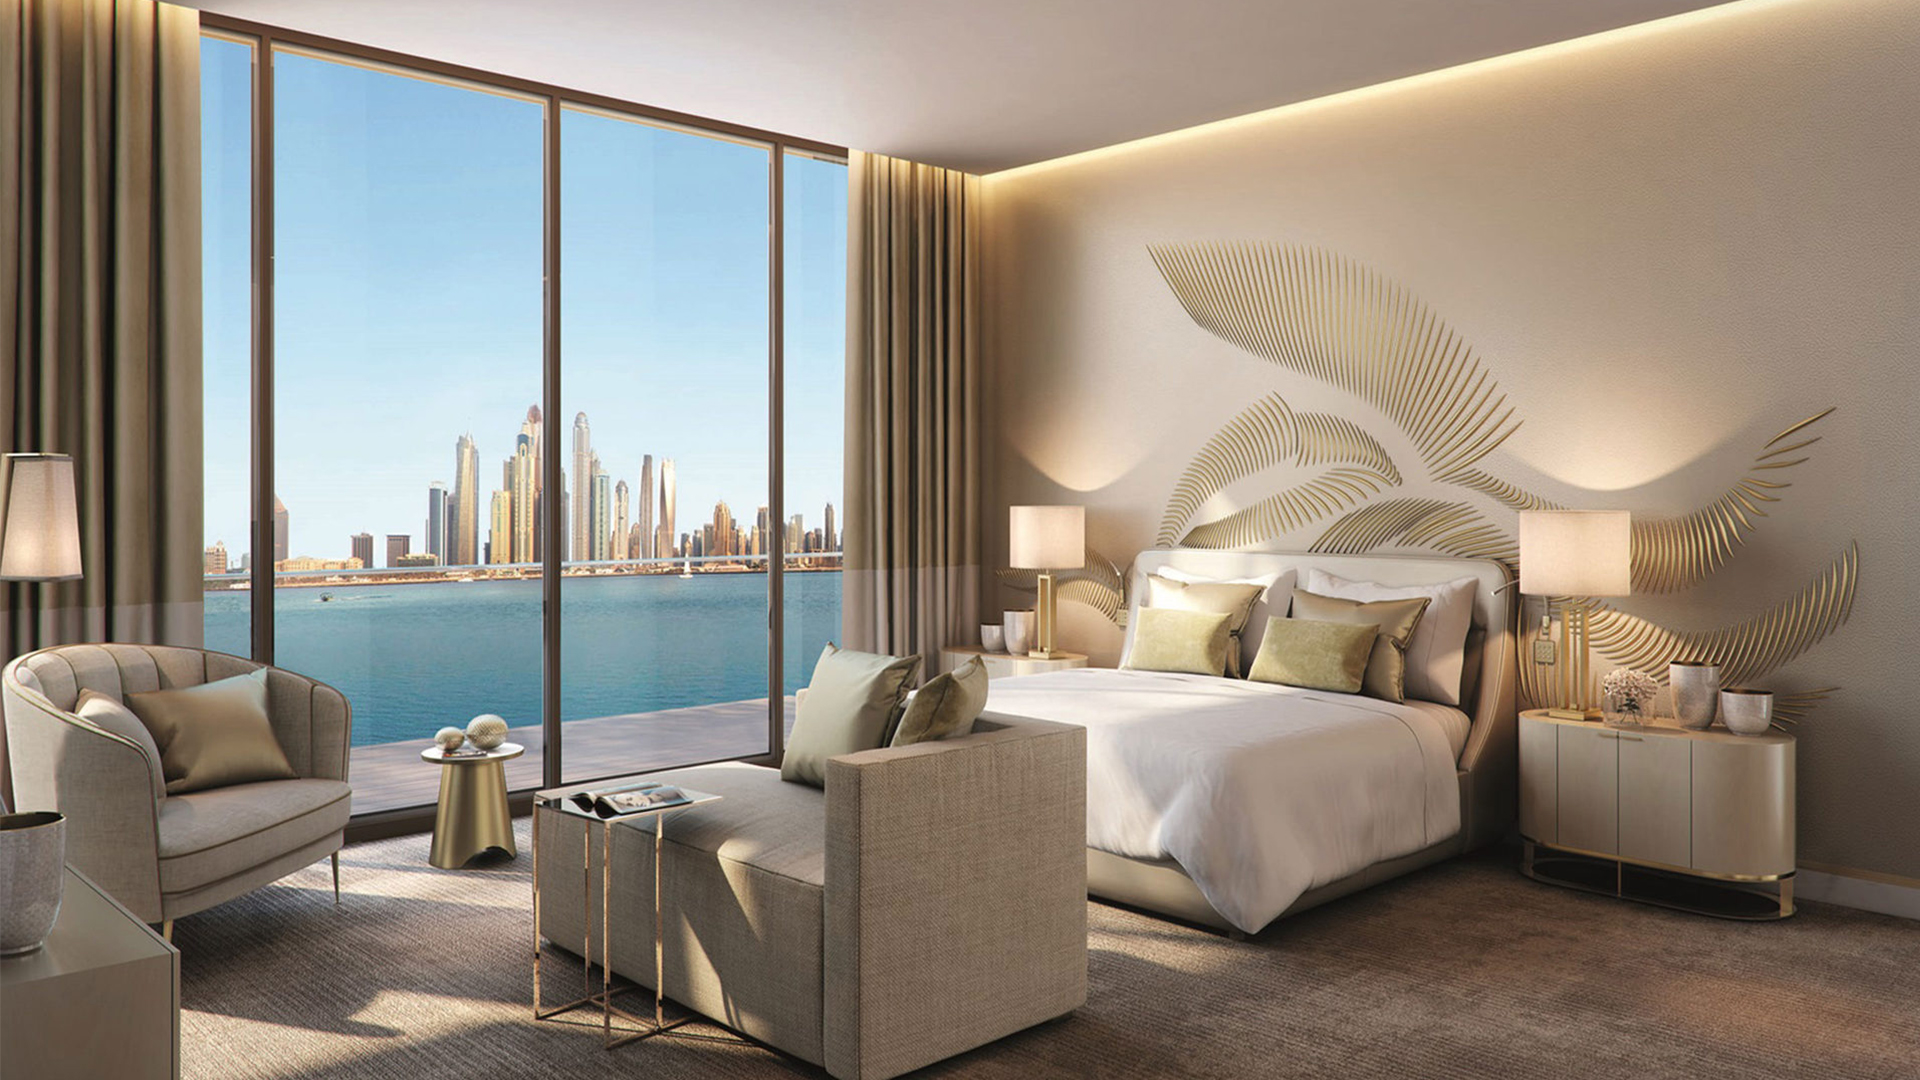 Atlantis the Royal Dubai Hotel Review: What It's Like to Stay in  Ultraluxury - Bloomberg